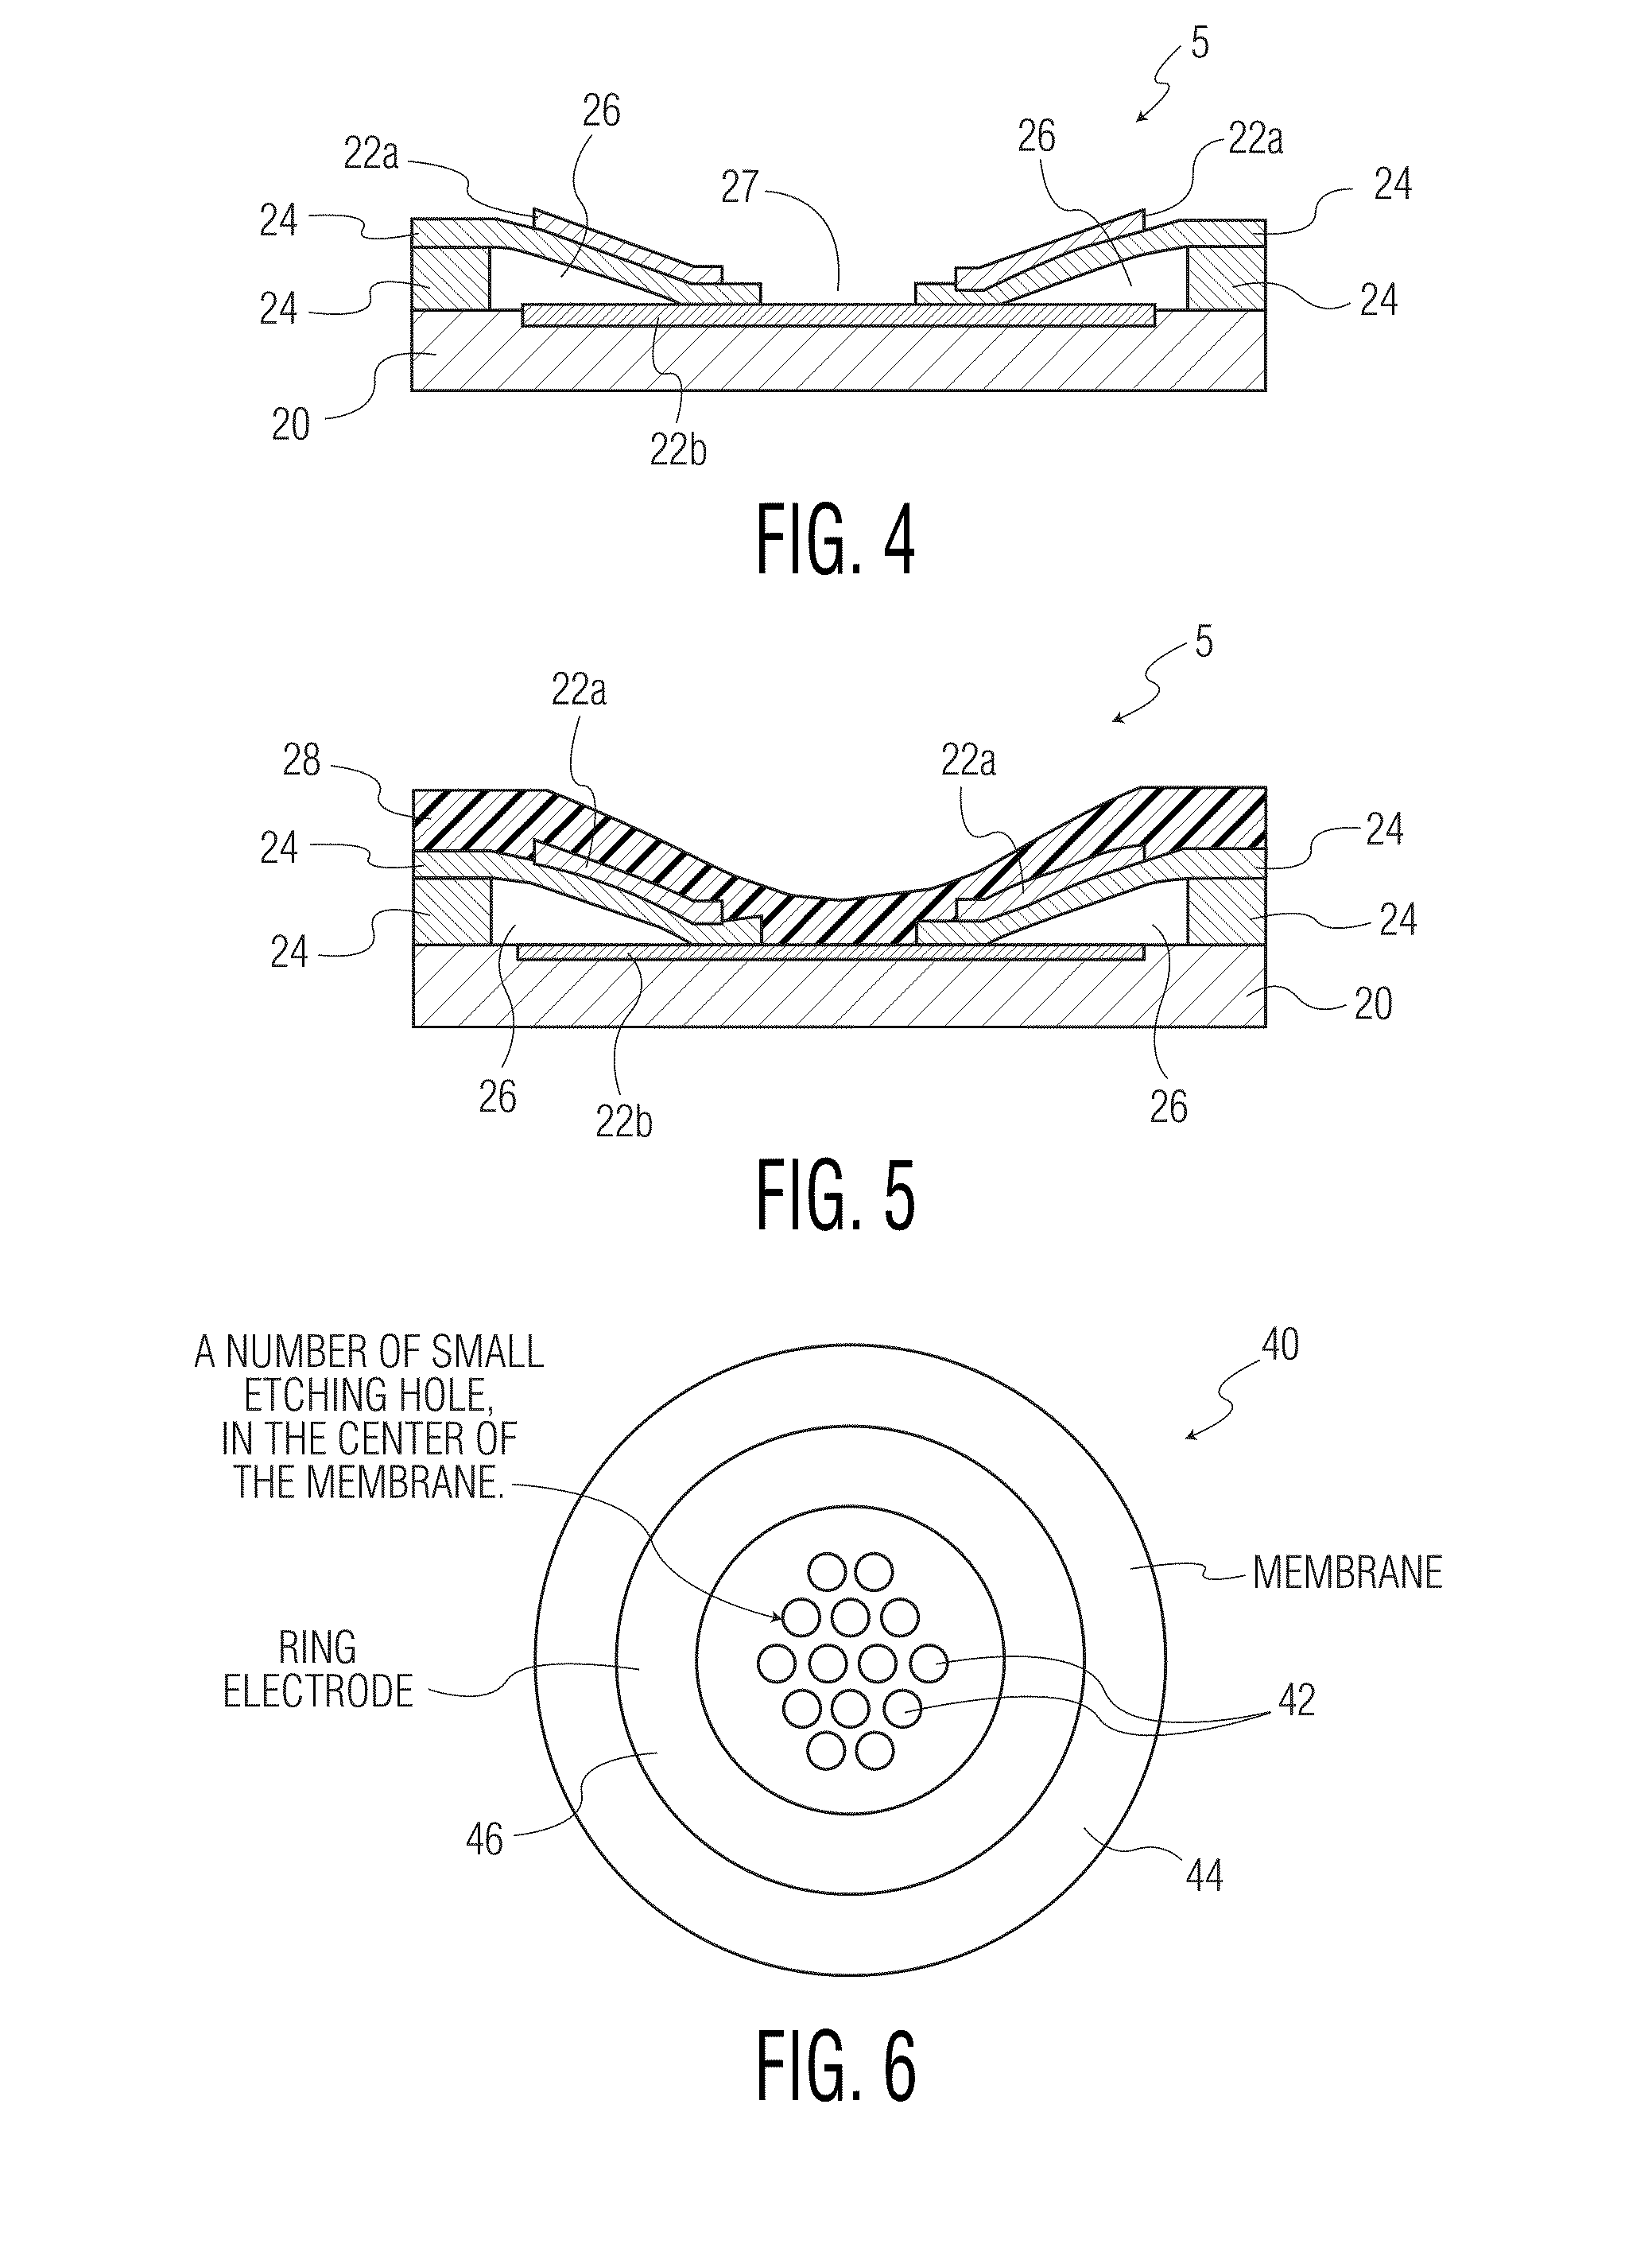 Method for production and using a capacitive micro-machined ultrasonic transducer